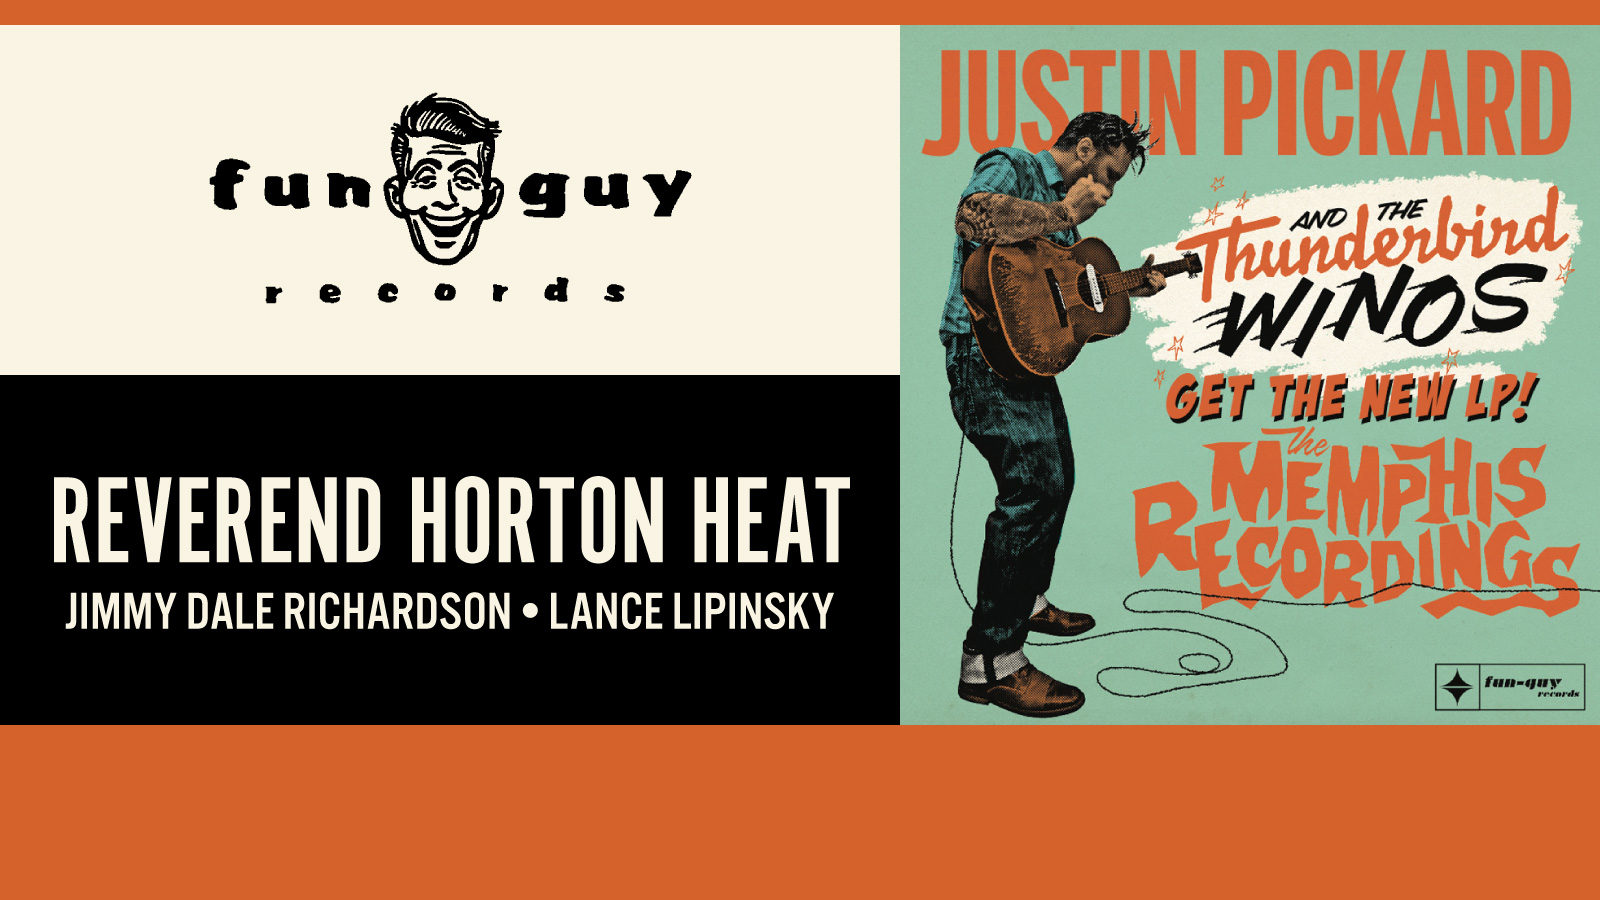 Reverend Horton Heat with Justin Pickard and the Thunderbird Winos Image